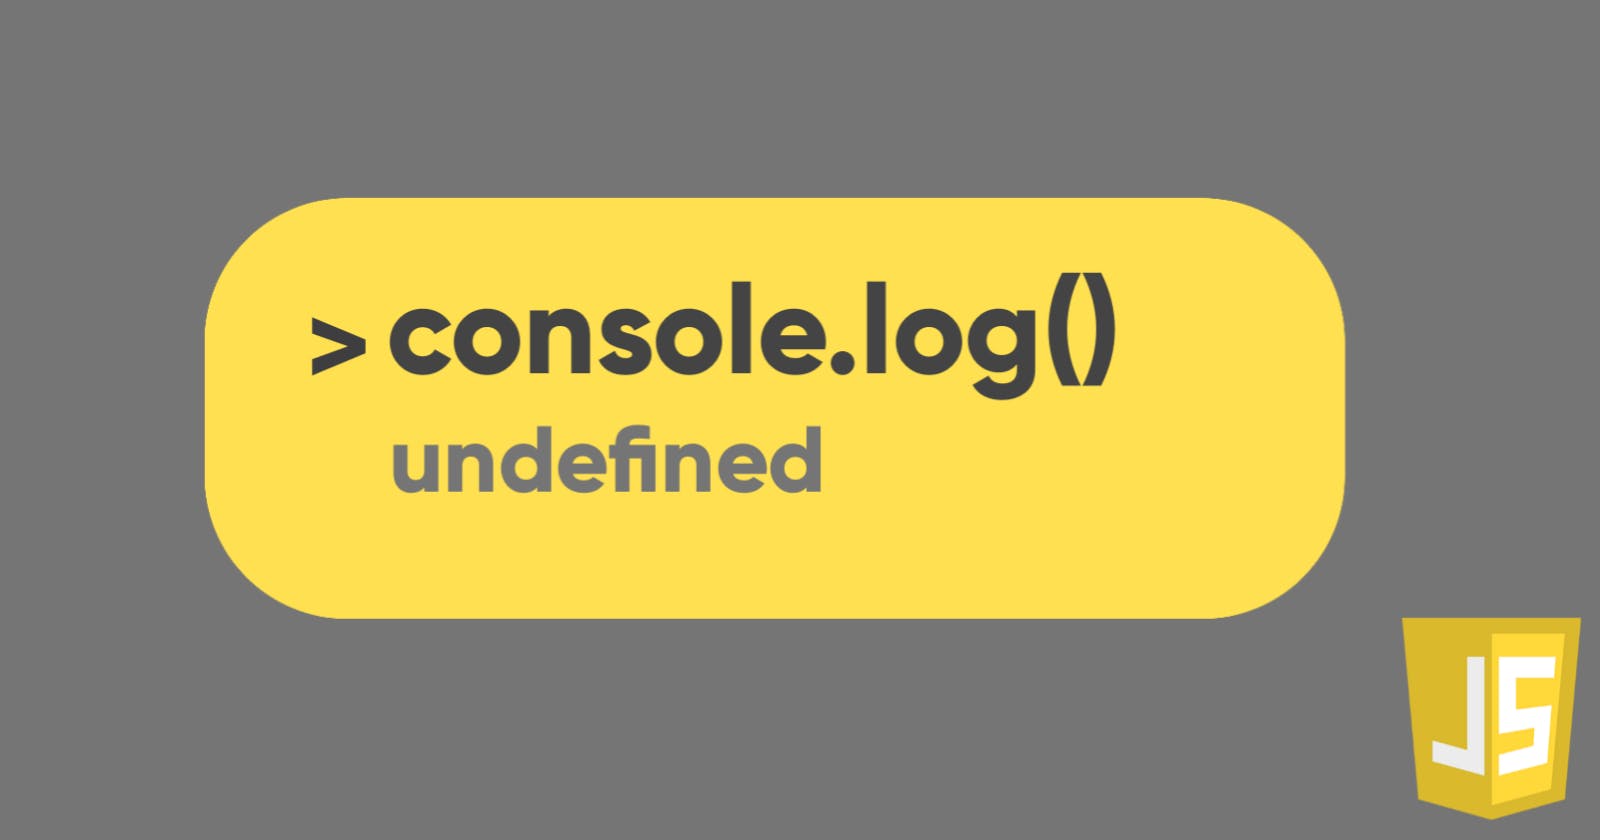 Why does console.log() return undefined?